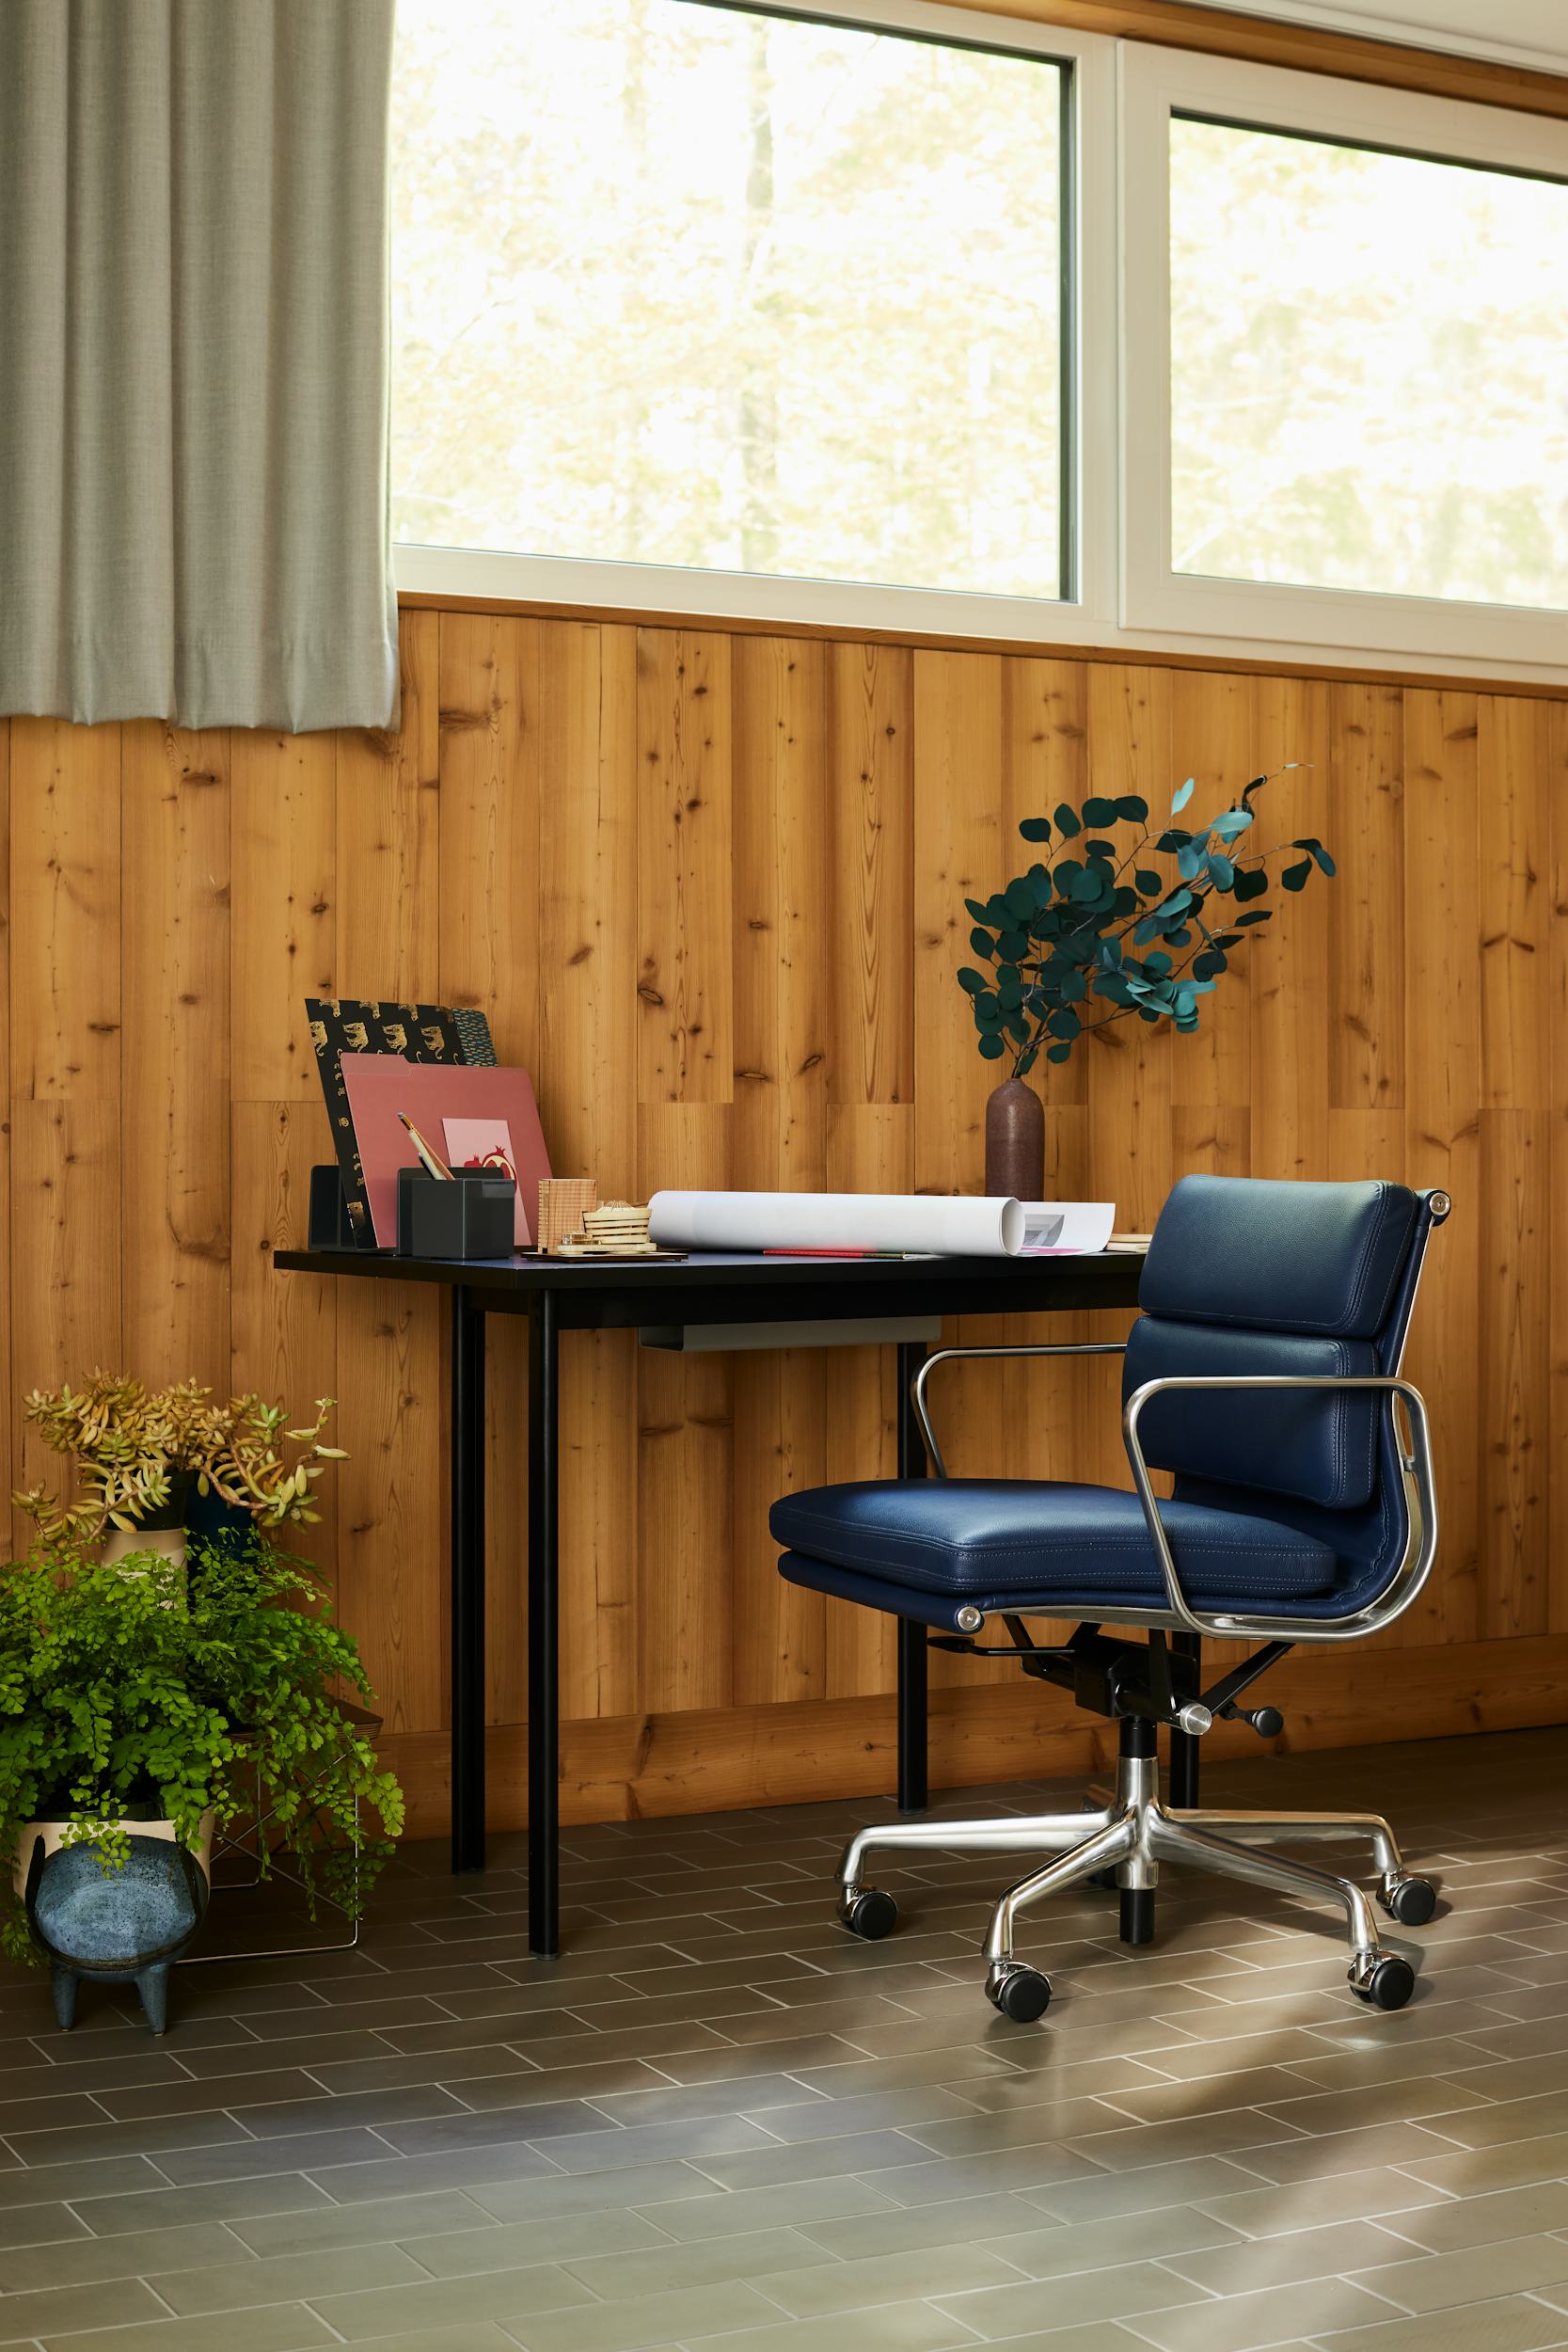 eames® soft pad group management chair